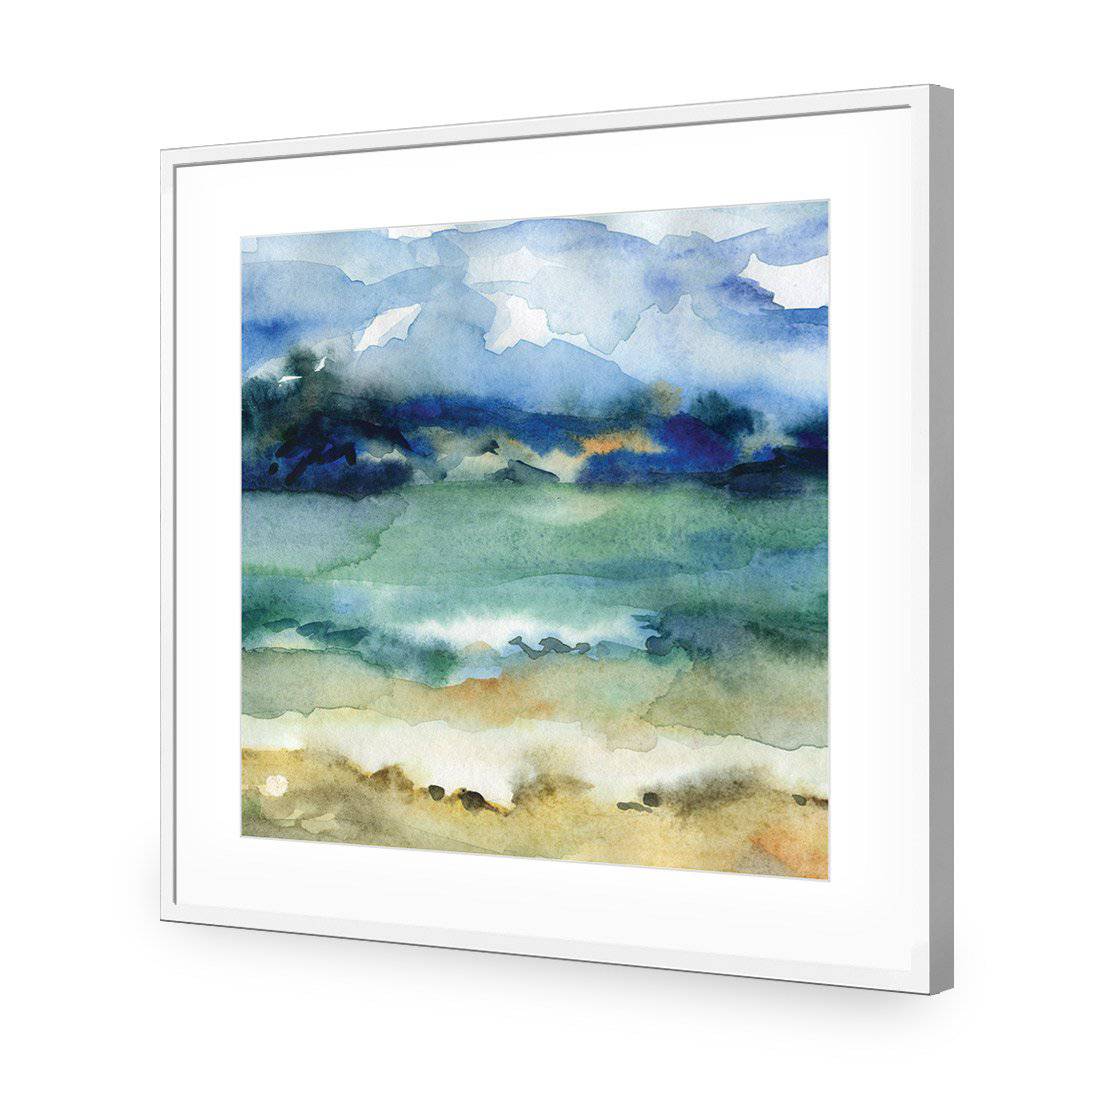 Timeless, Square-Acrylic-Wall Art Design-With Border-Acrylic - White Frame-37x37cm-Wall Art Designs